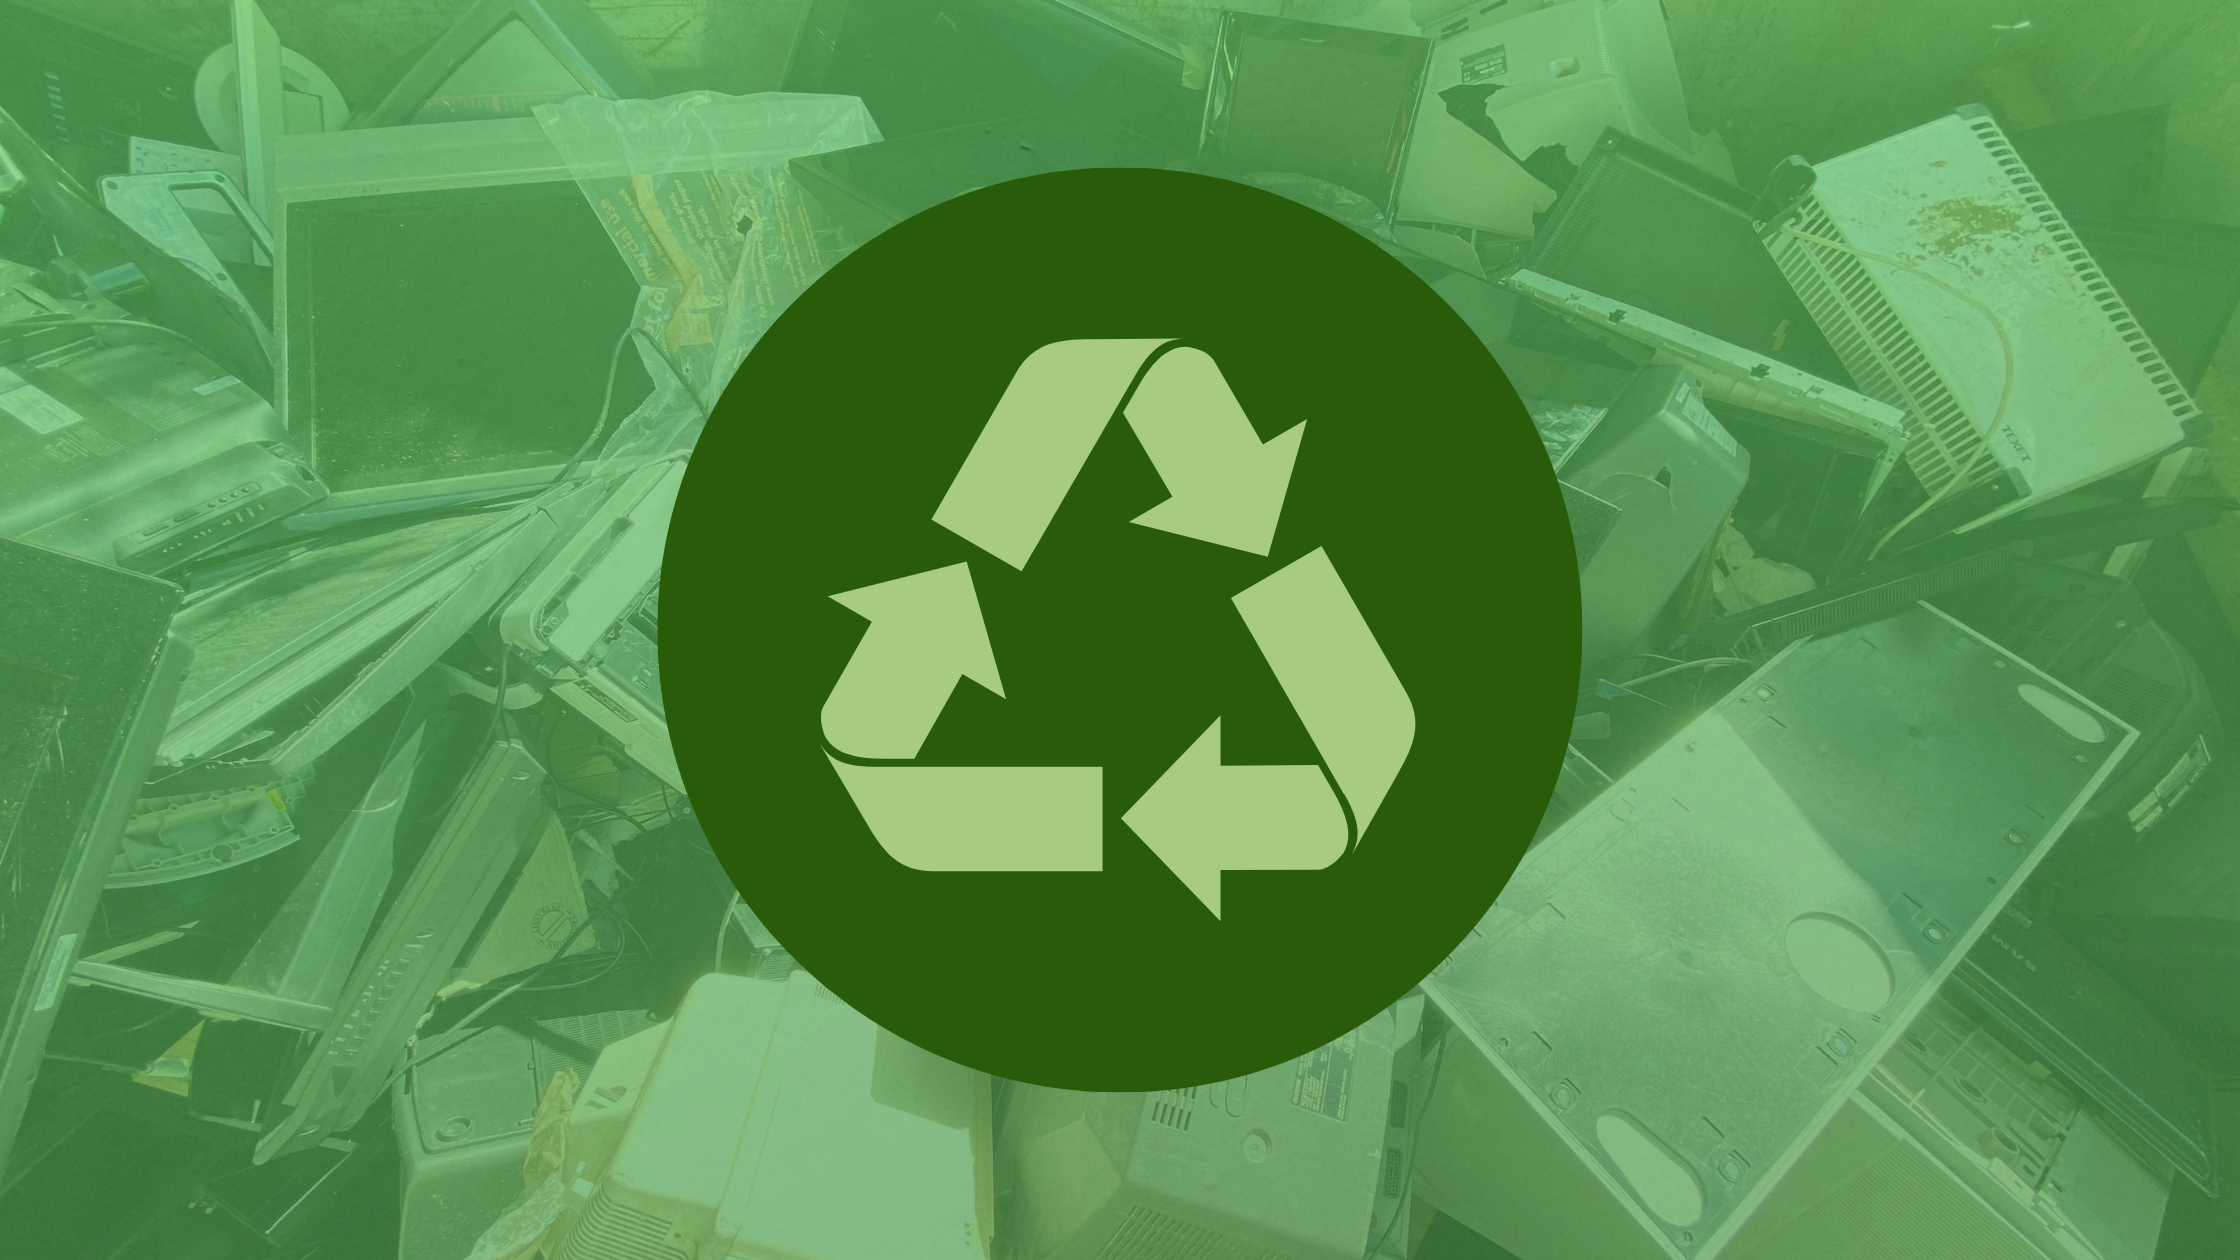 Image of ewaste with a green overlay and recycling symbol